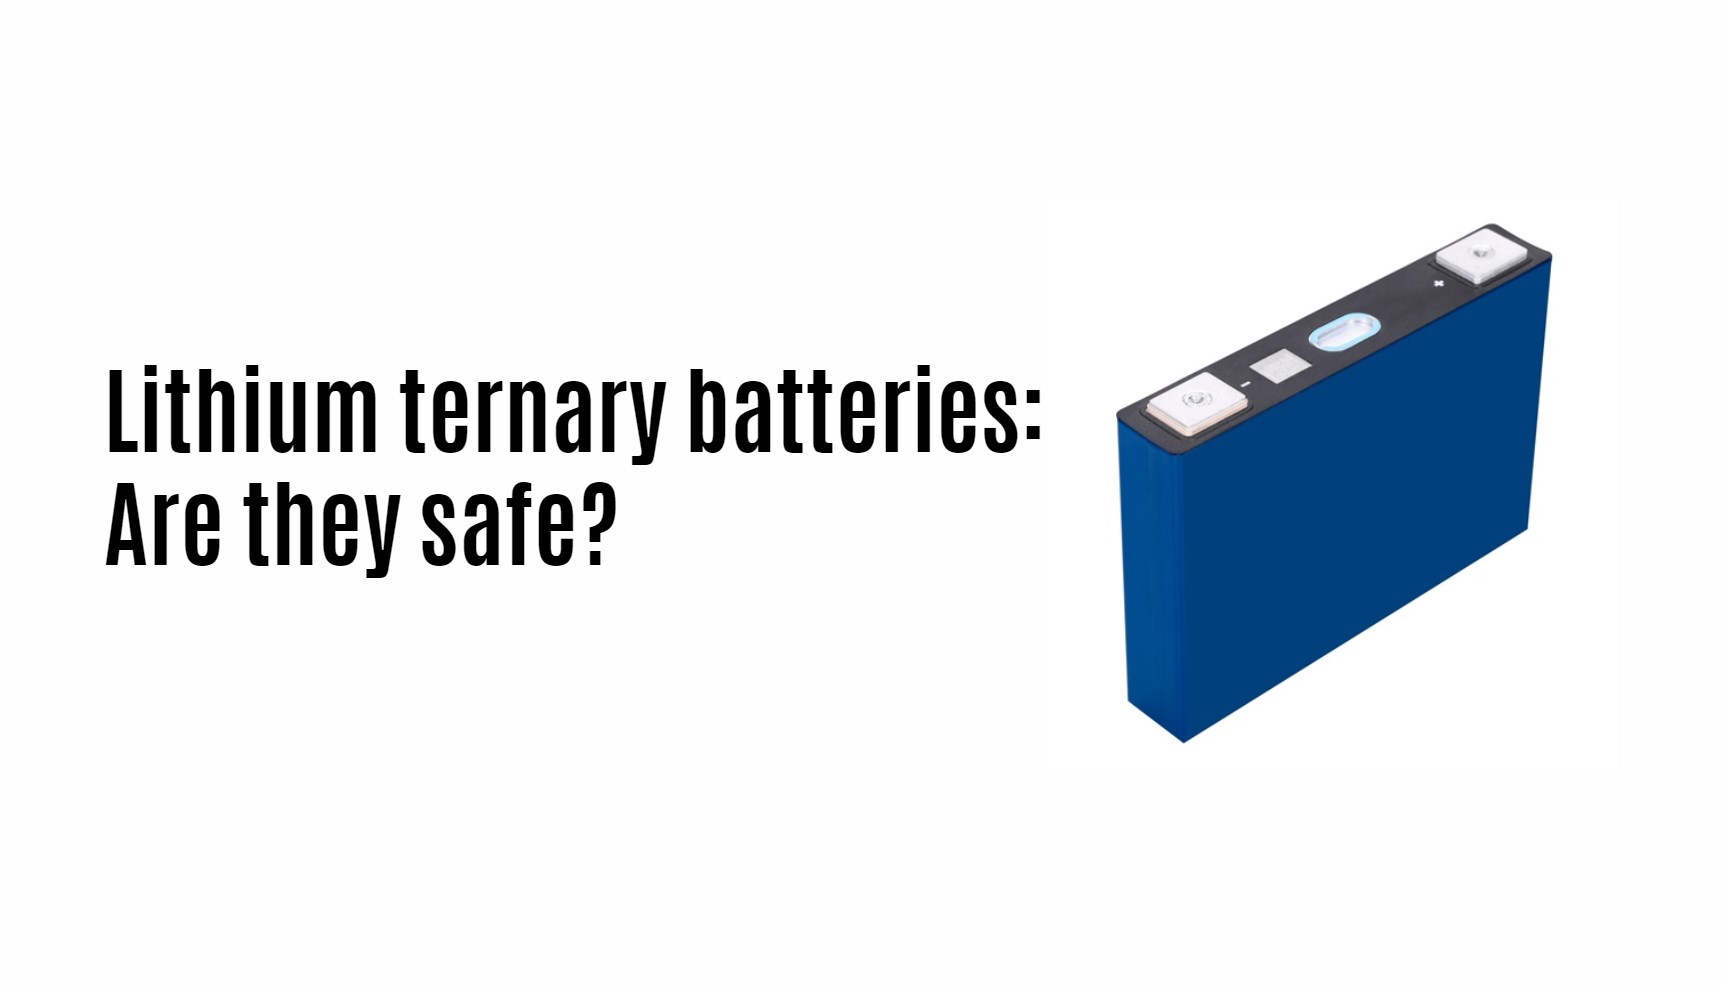 Lithium ternary batteries: are they safe?